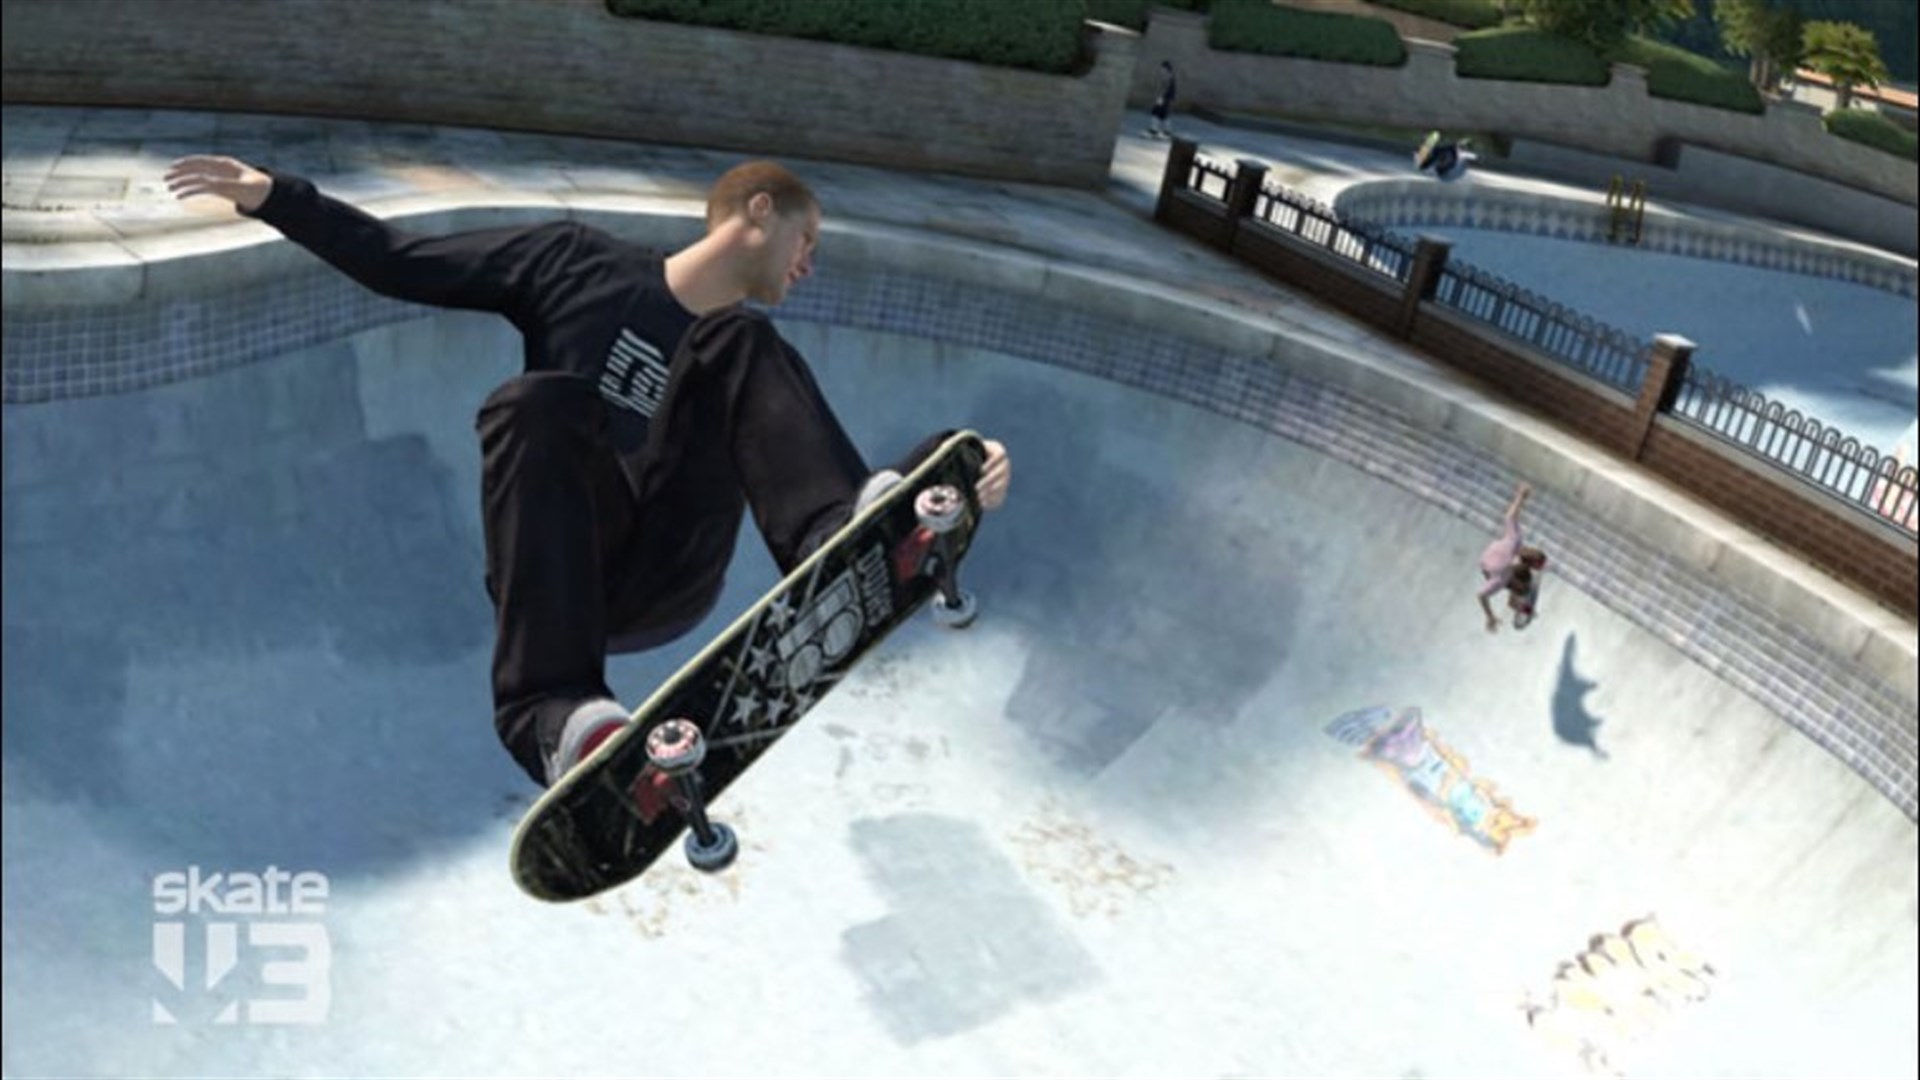 skate 3 ps3 store